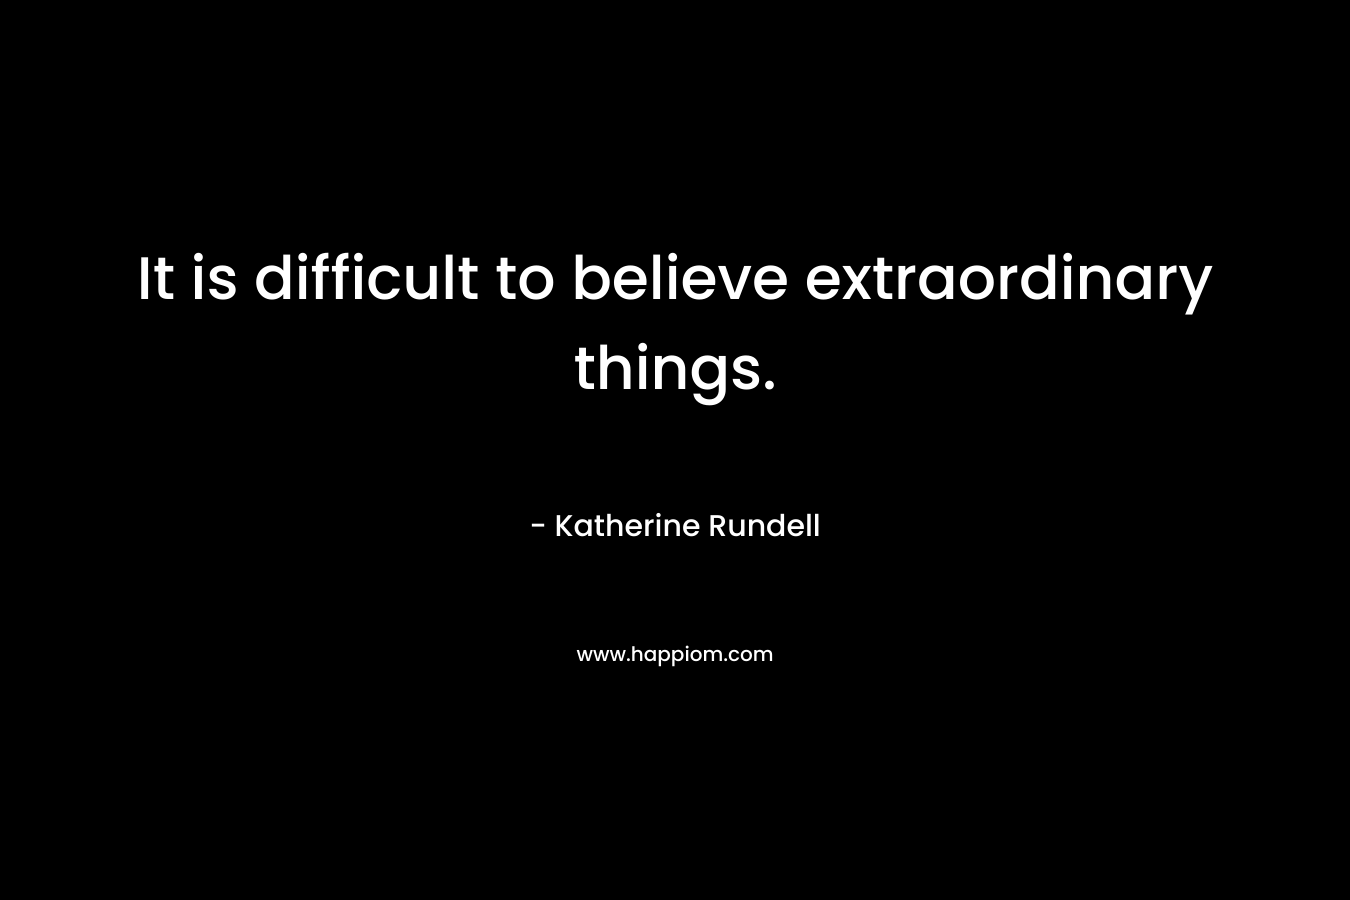 It is difficult to believe extraordinary things.